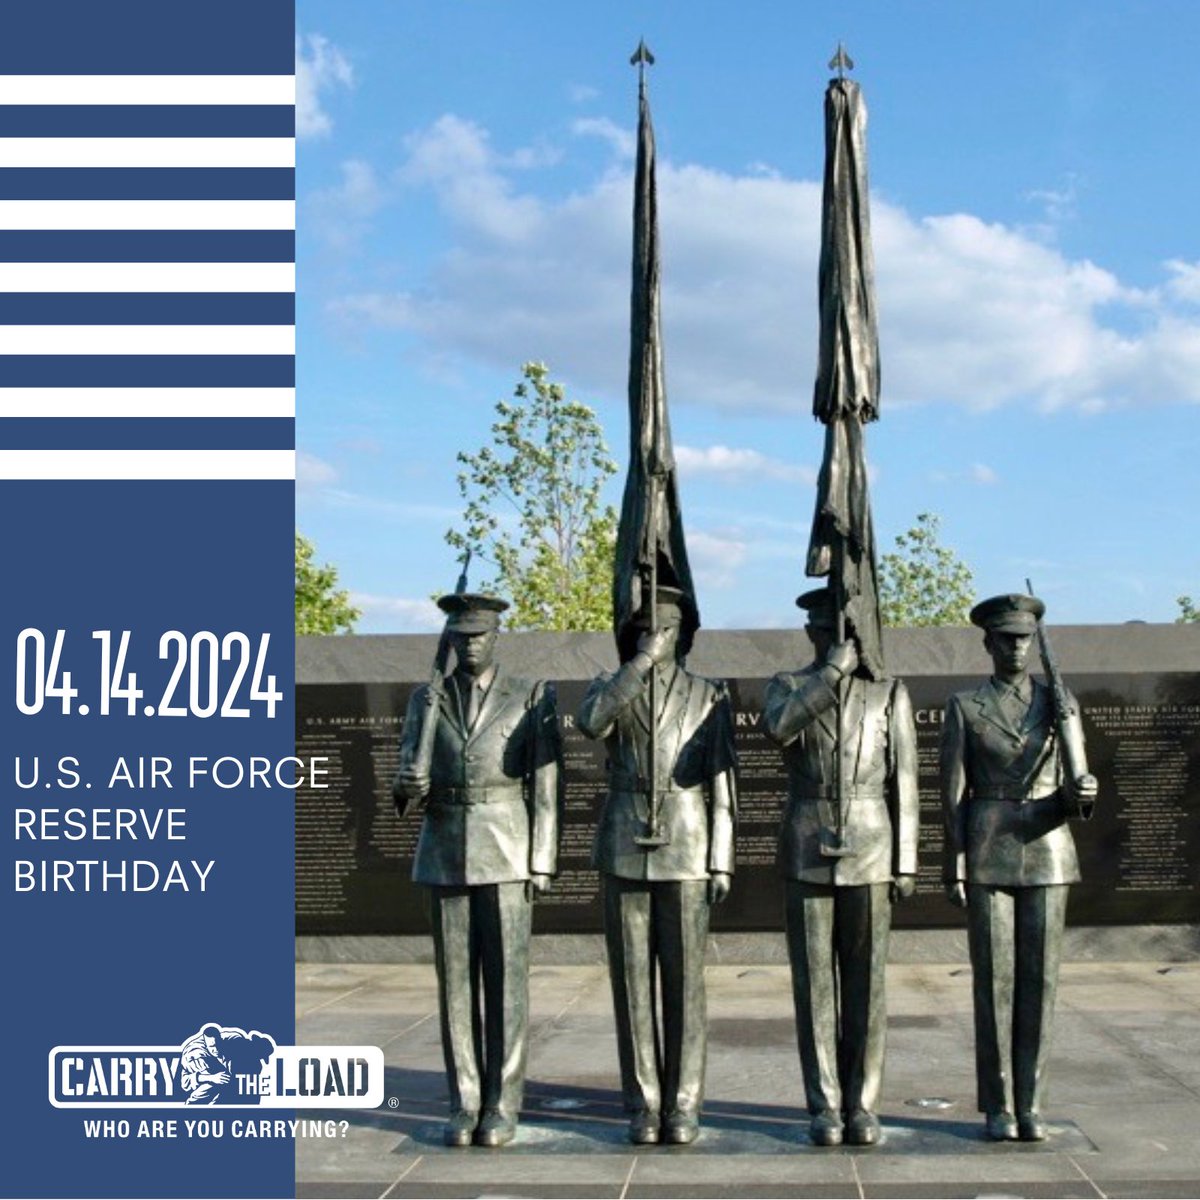 Happy Birthday to the US Air Force Reserve! Today, we celebrate the dedication and service of all Reserve members past and present. Thank you for your commitment to protecting our skies and defending our freedom. #AirForceReserveBirthday #CarryTheLoad